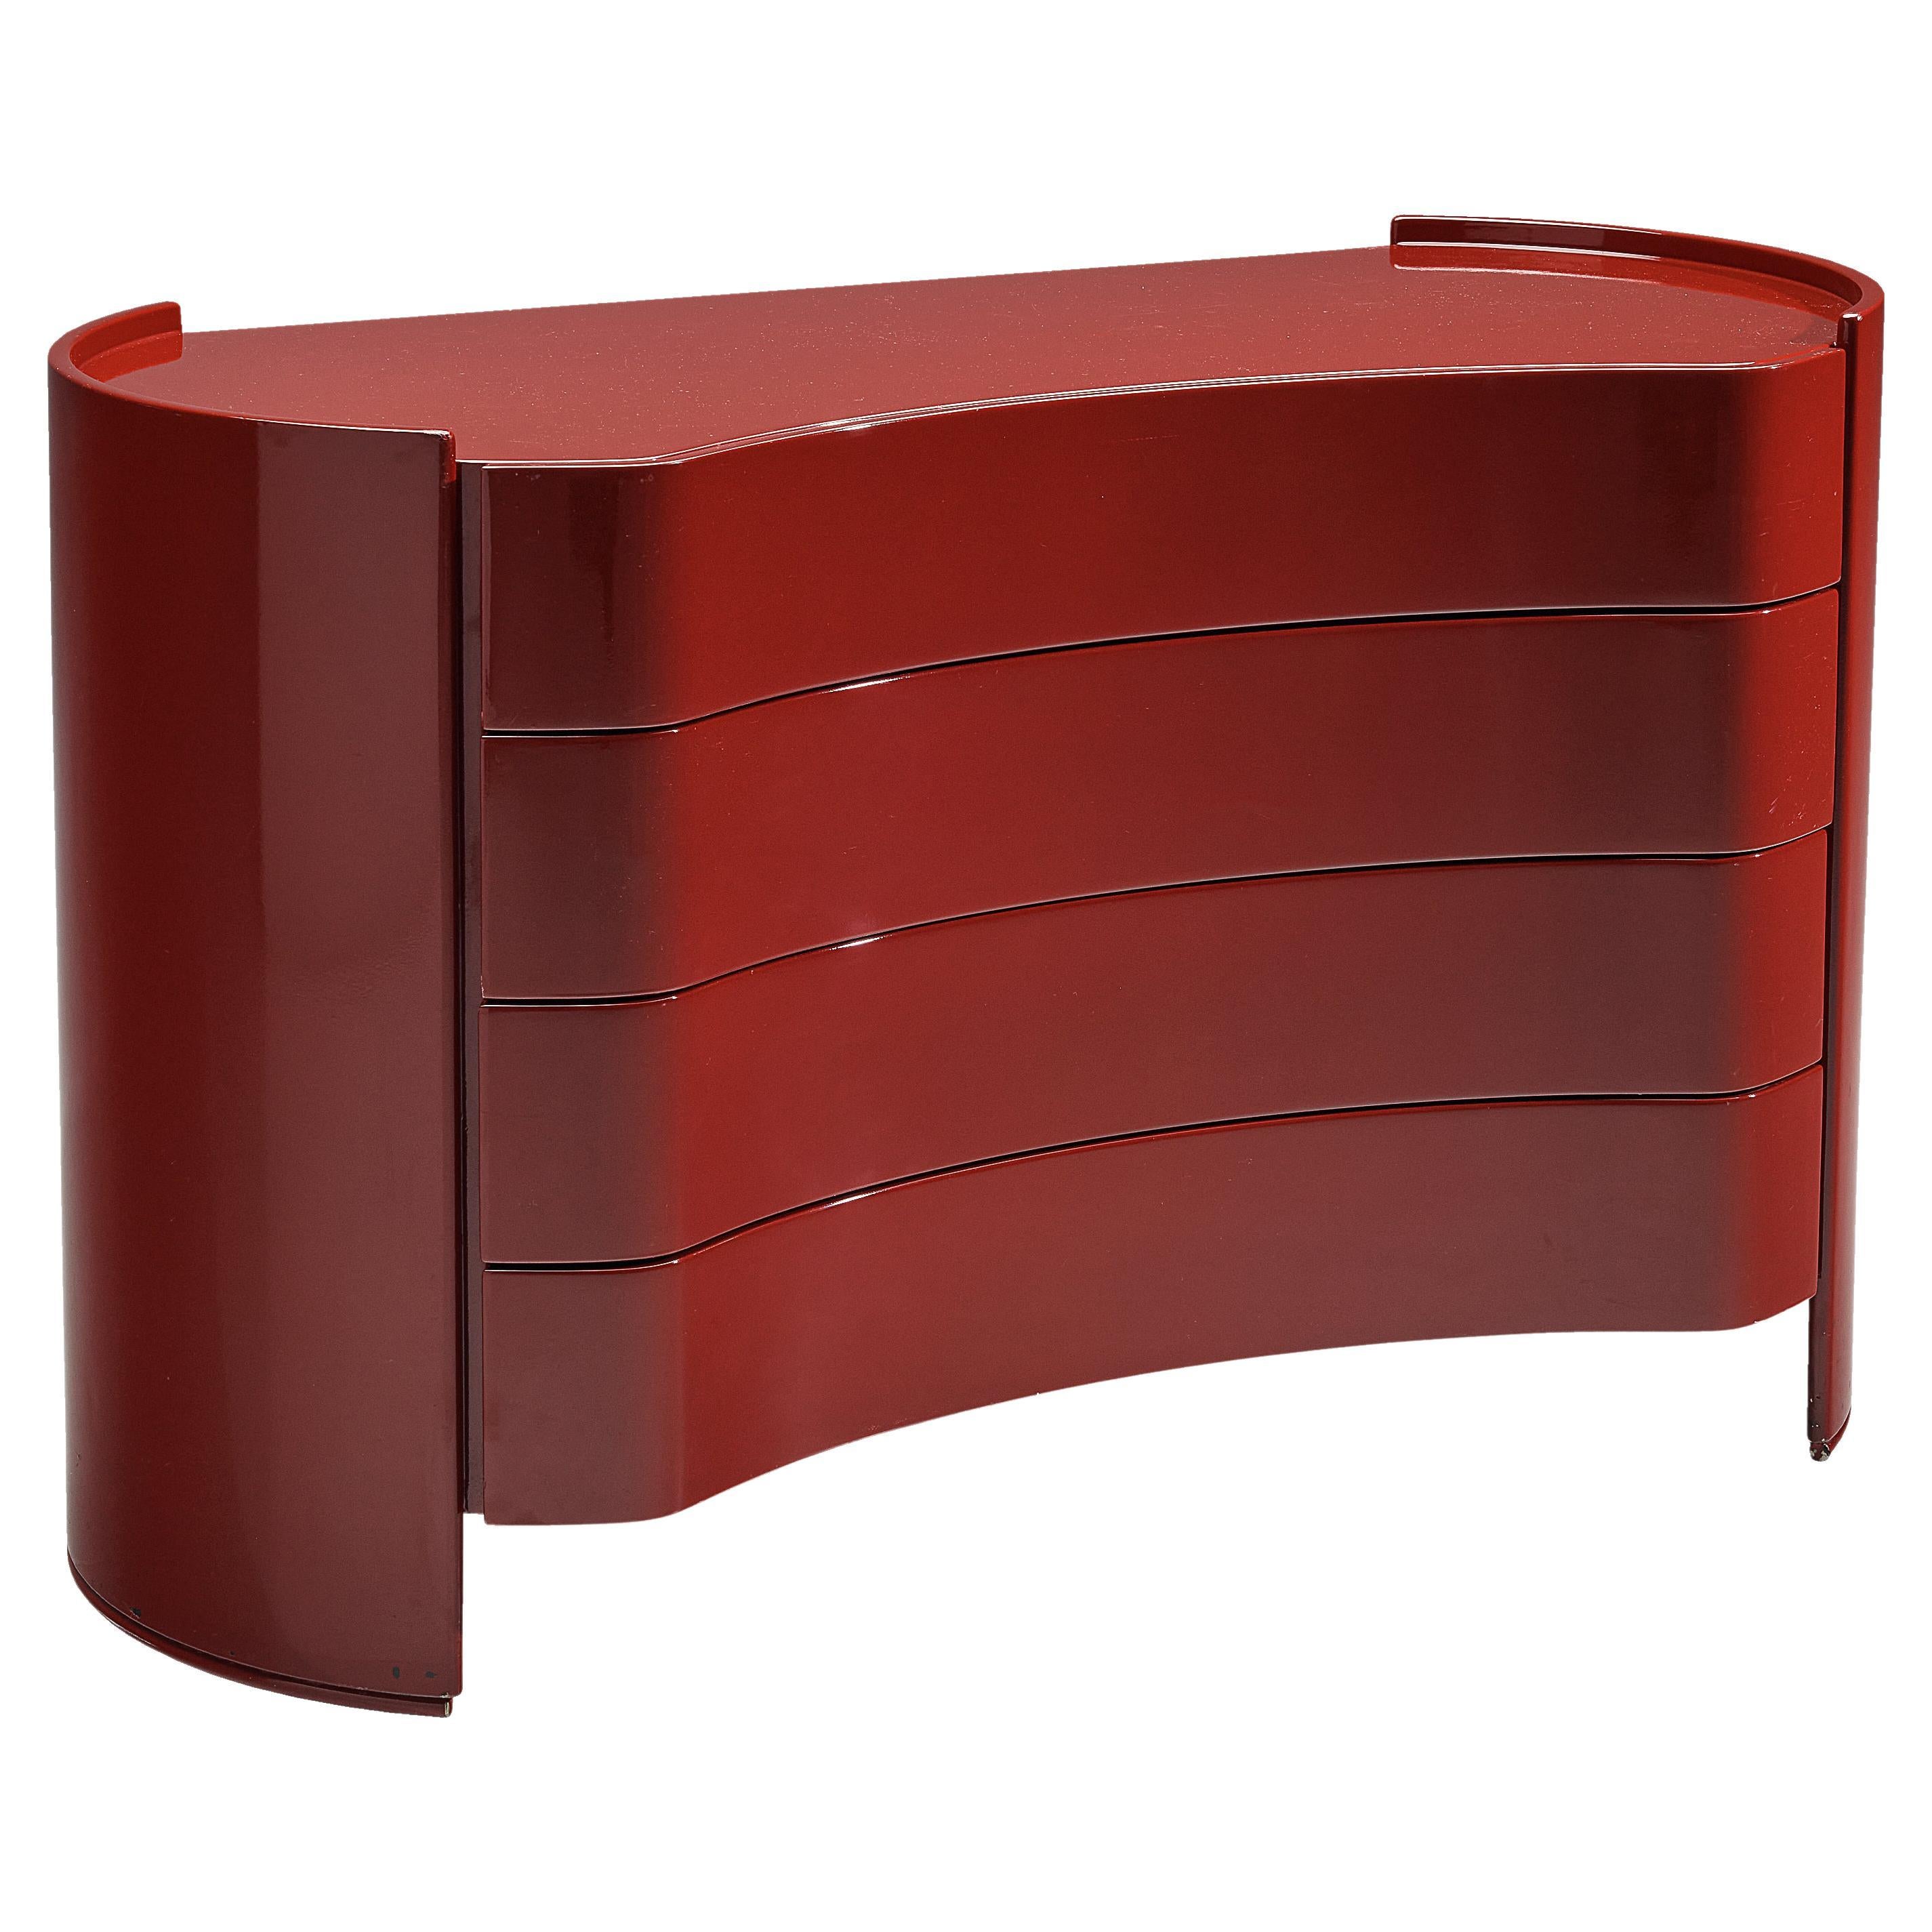 Curved Italian Chest of Drawers in Red Lacquered Wood by Benatti